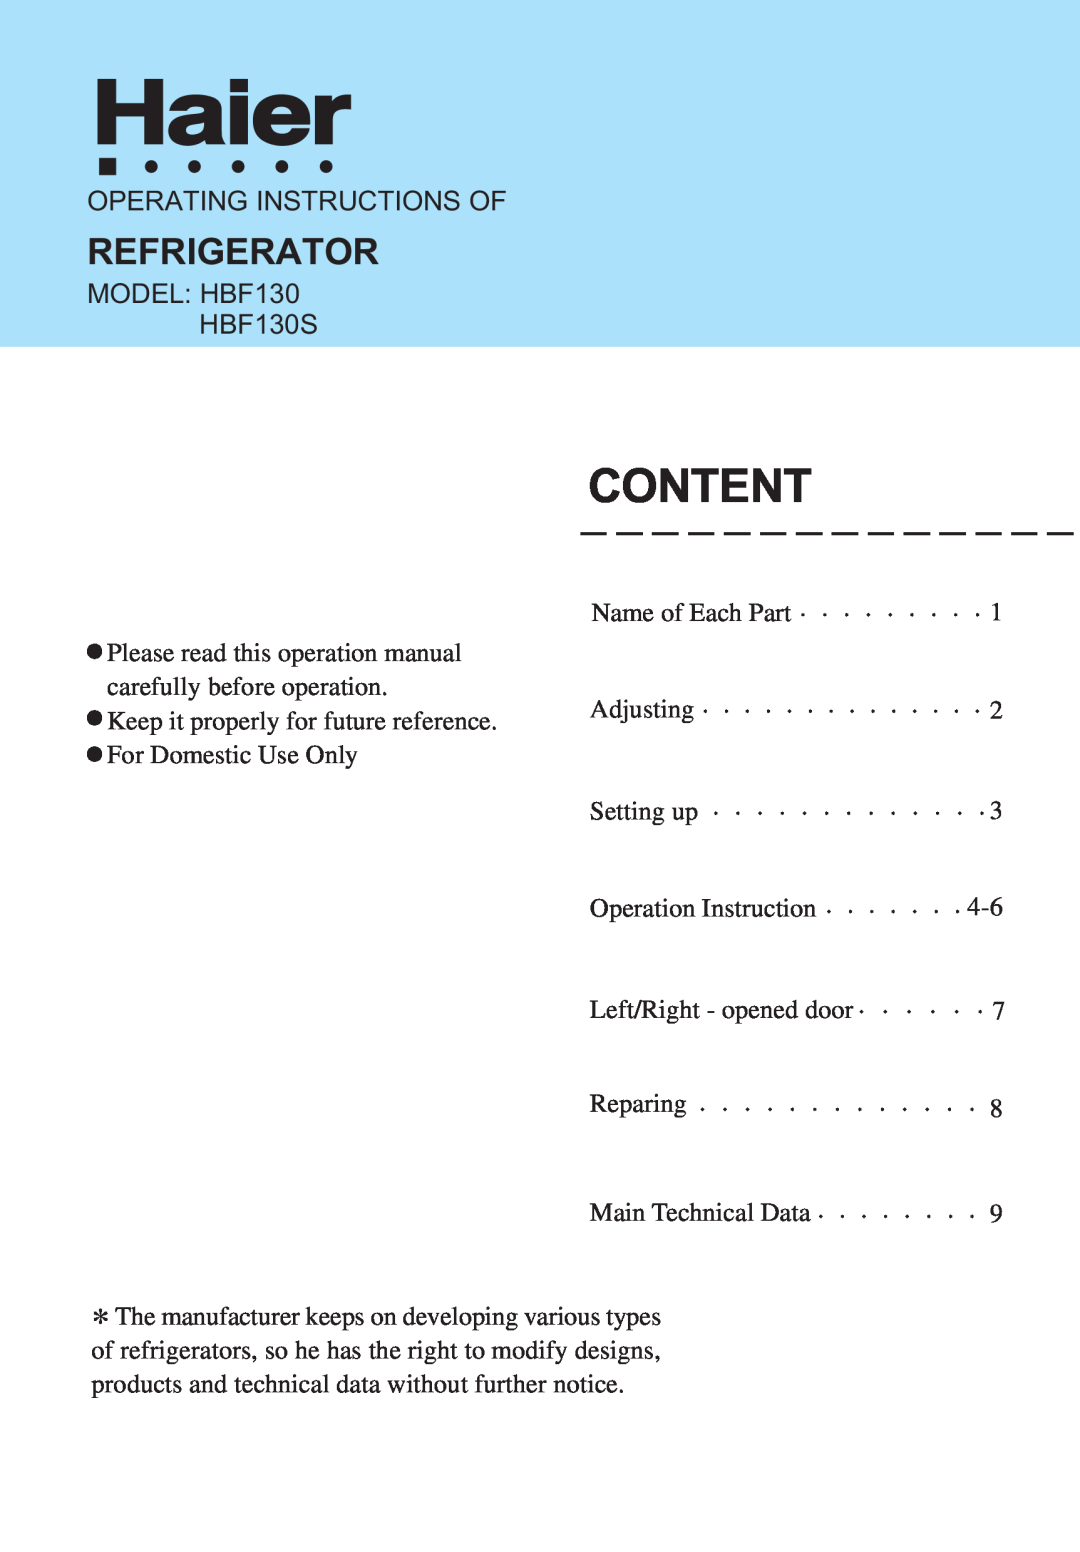 Haier operation manual Content, Refrigerator, Operating Instructions Of, MODEL HBF130 HBF130S 